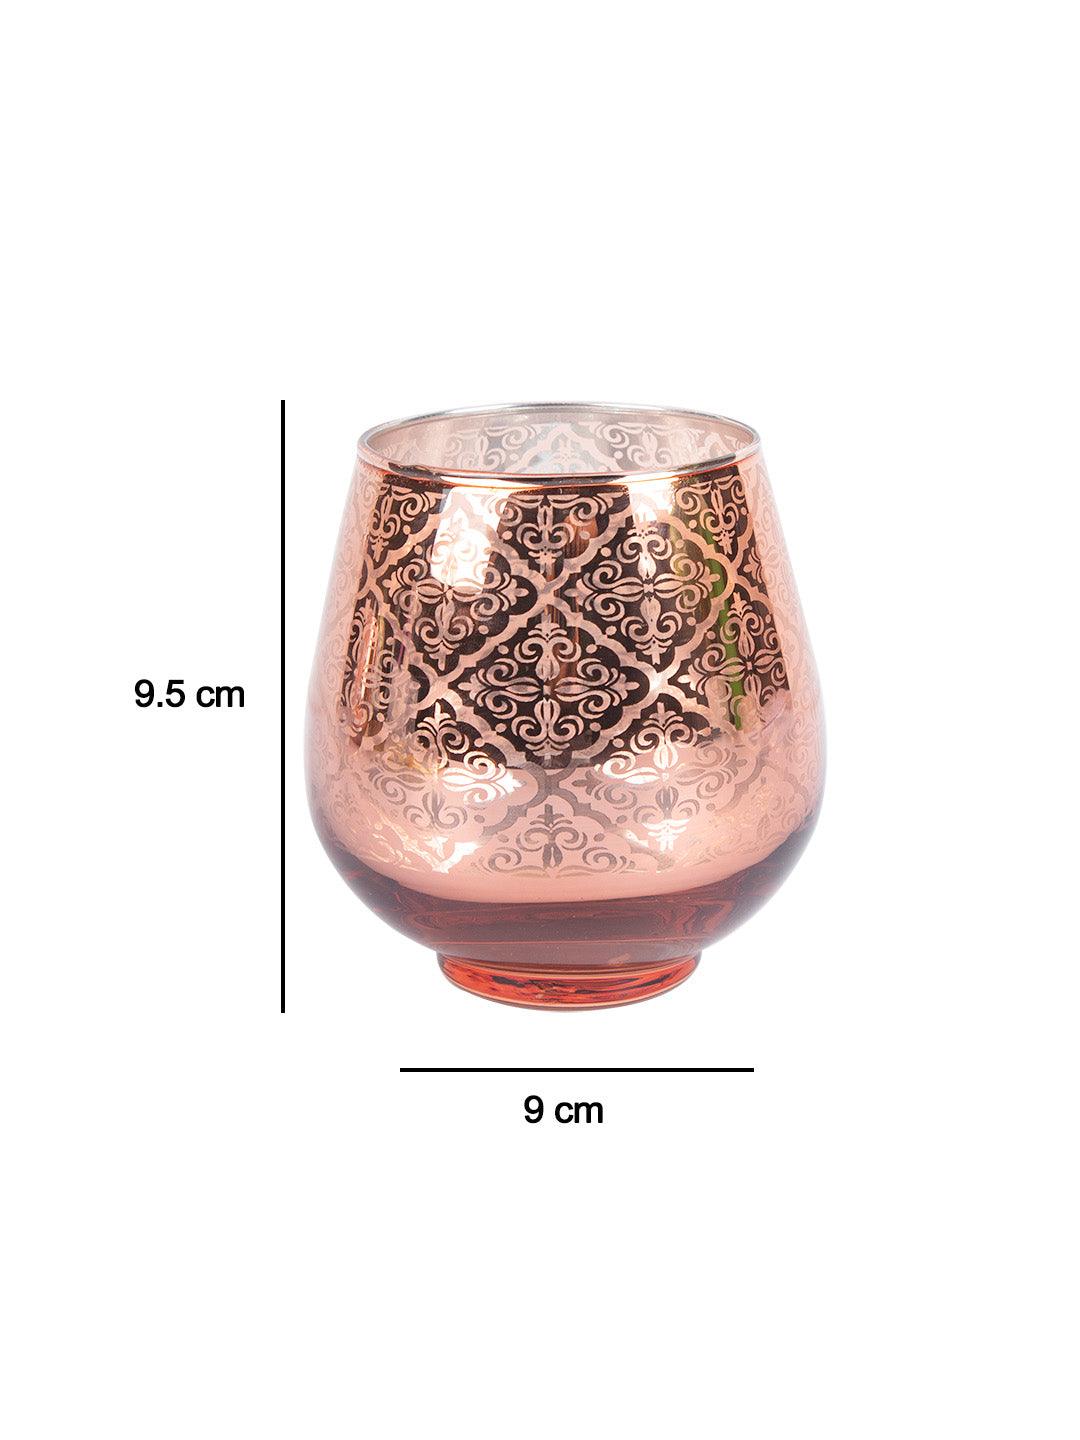 Decorative Tealight Candle Holders Pack Of 2 Pcs - MARKET 99